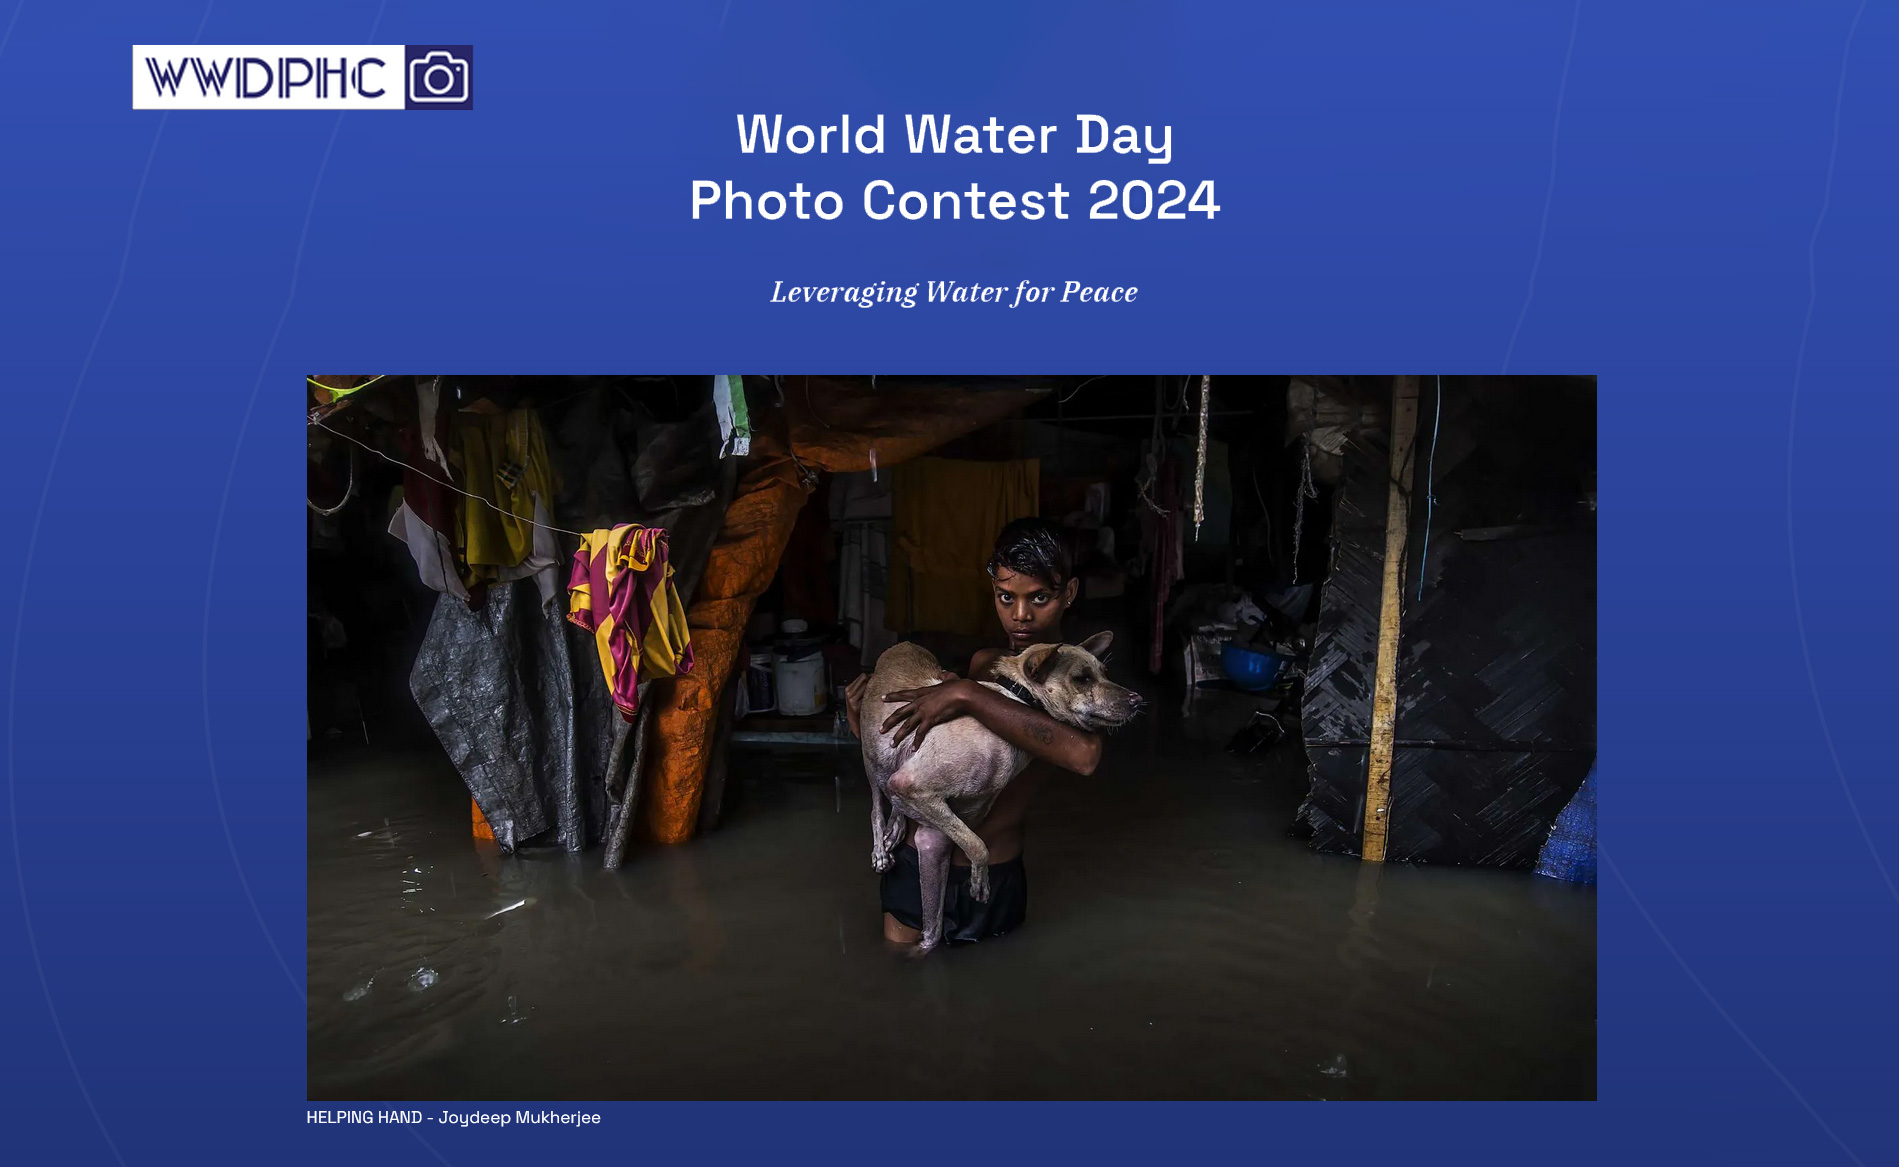 World Water Day Photo Contest 2024